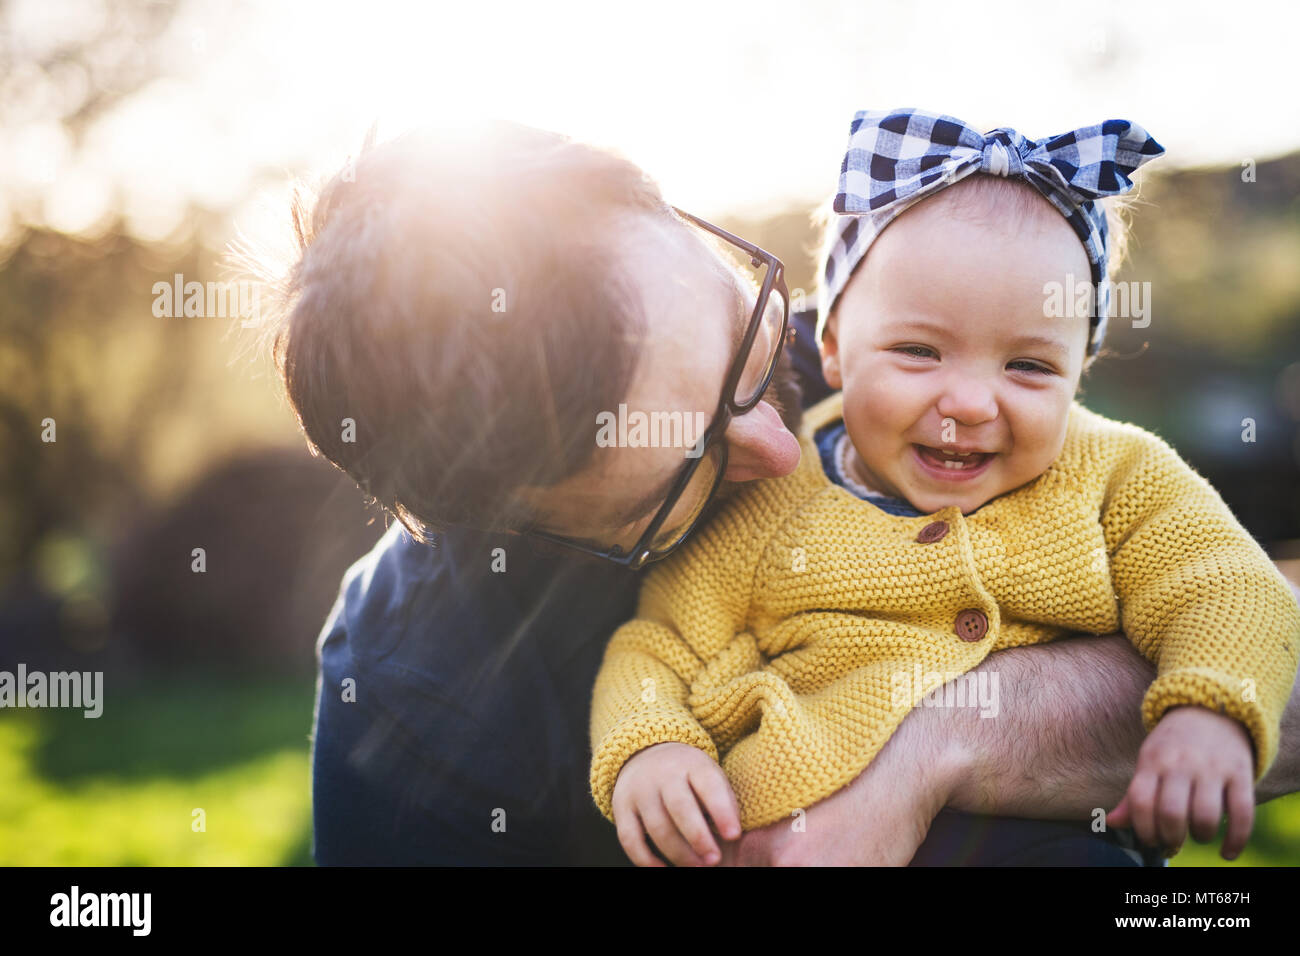 A father with his toddler daughter outside in spring nature. Stock Photo